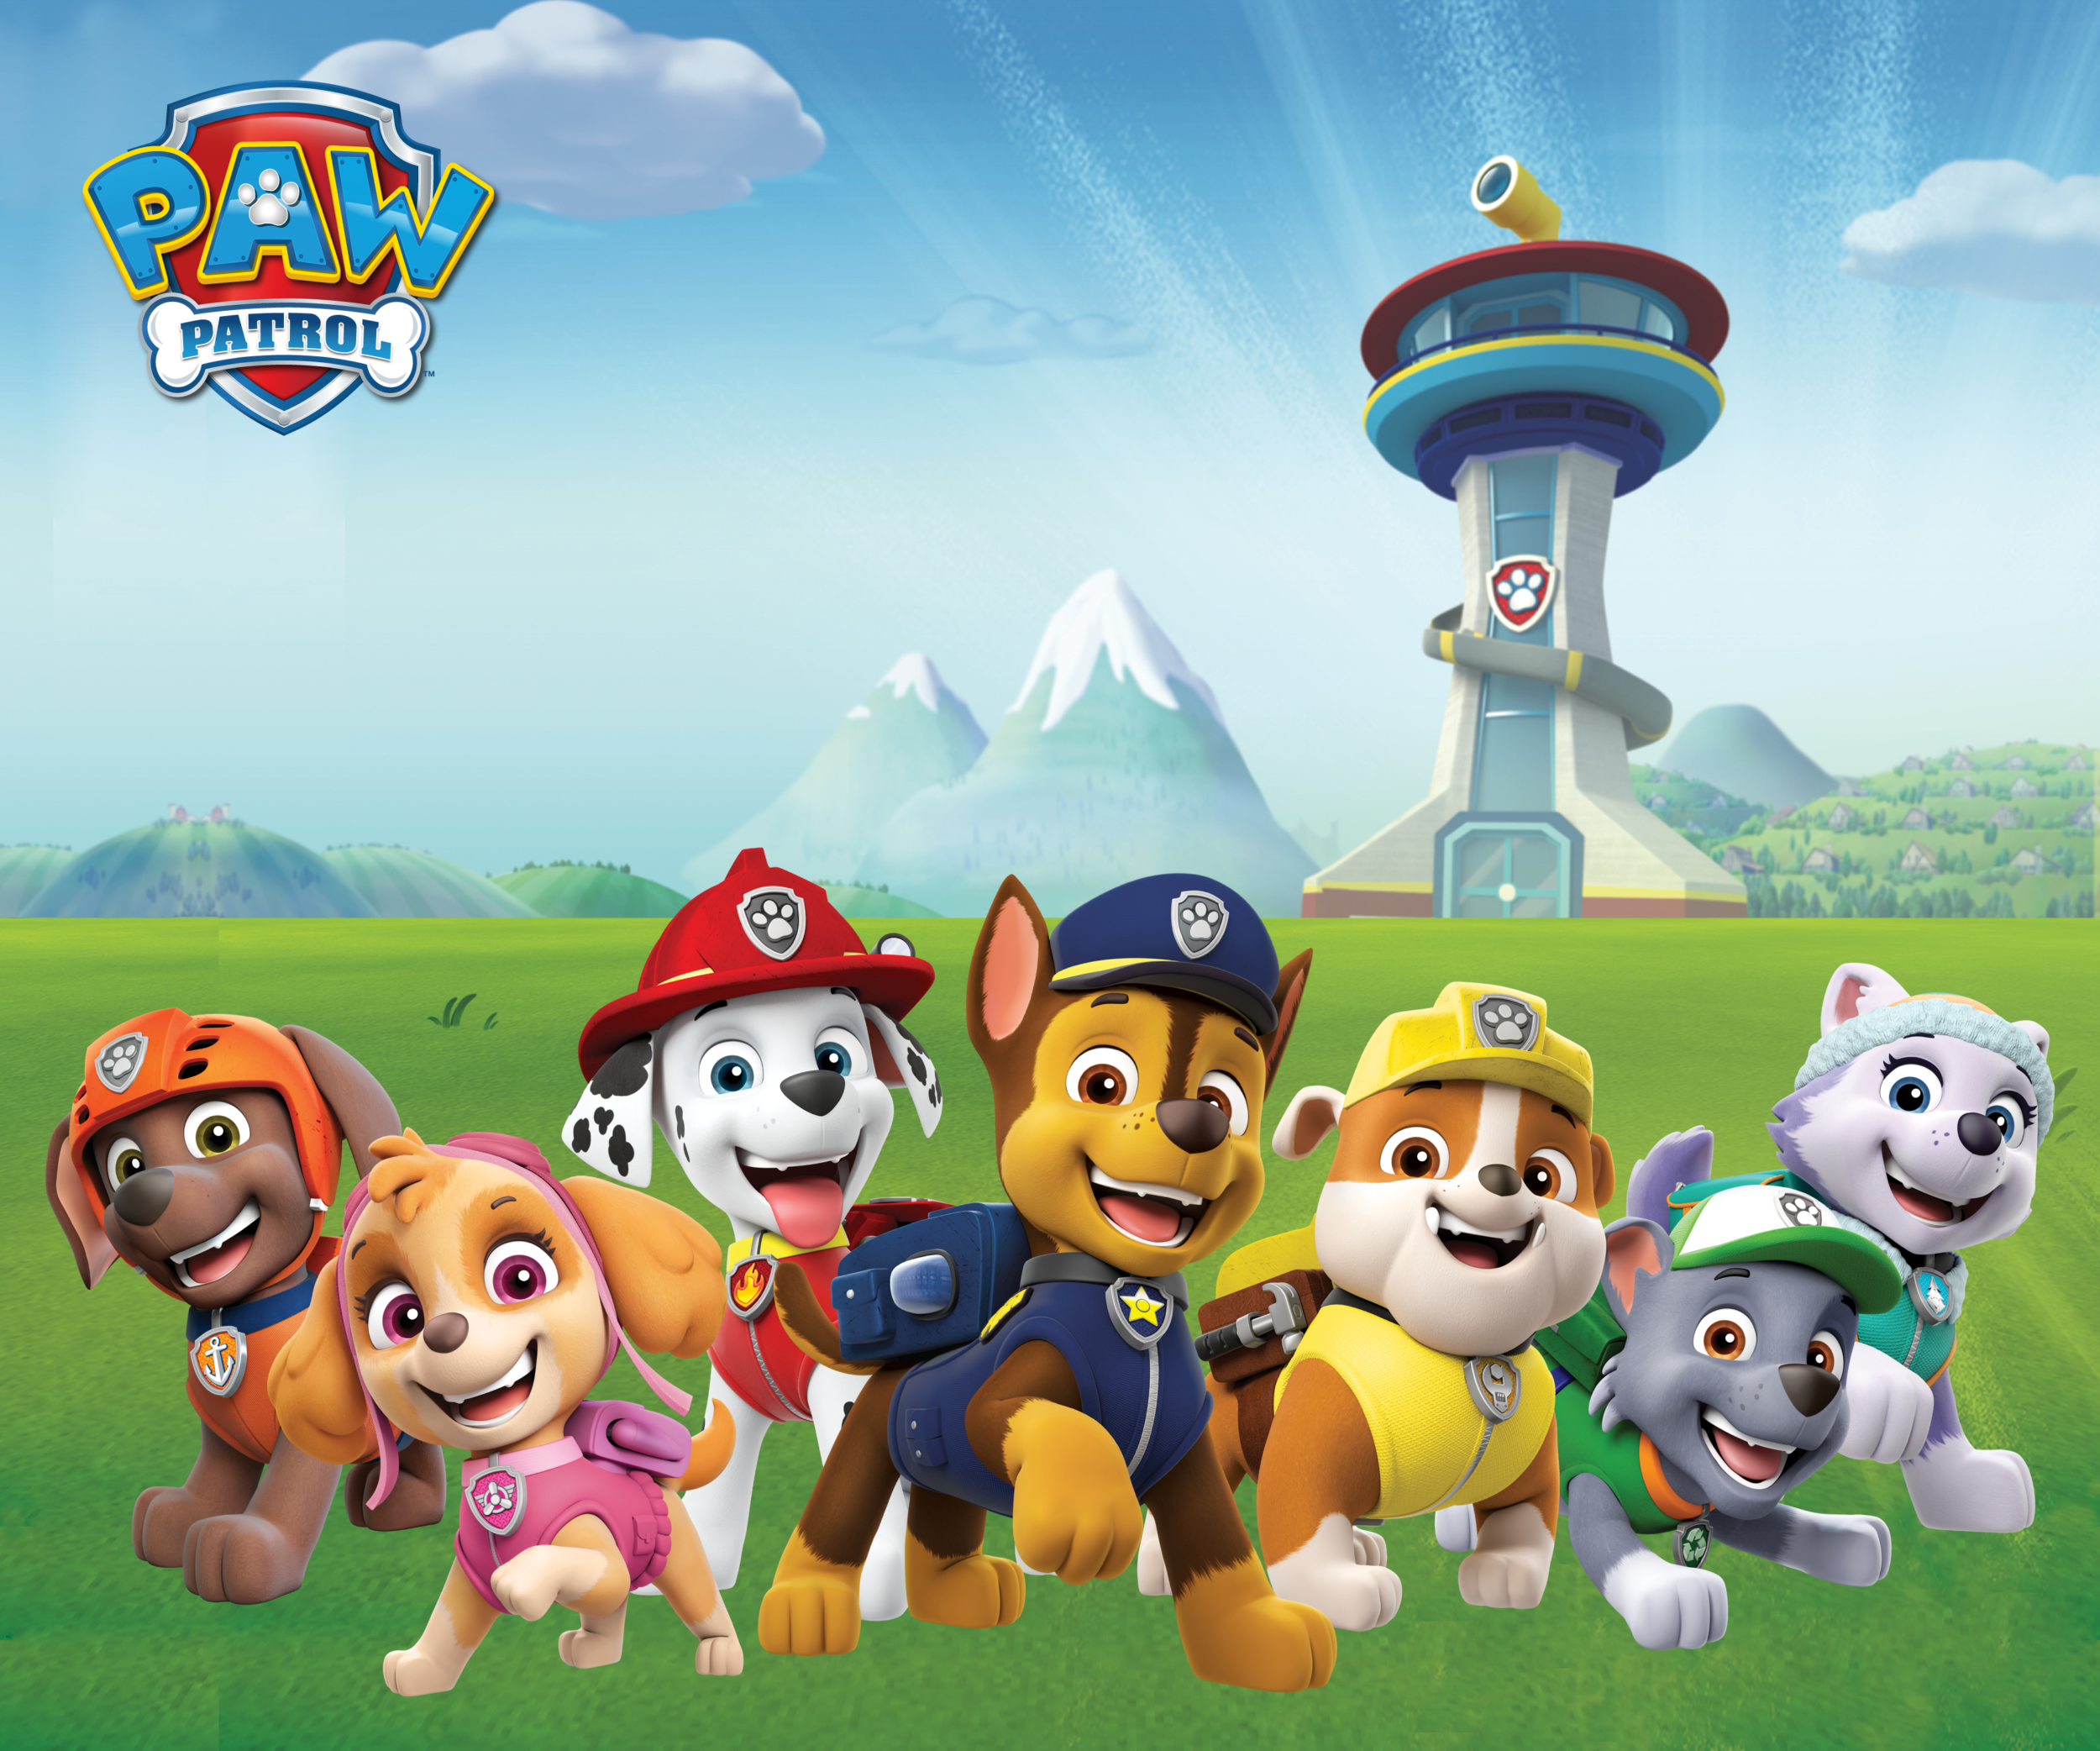 Paw Patrol tops Netflix's most popular kids' shows and movies -